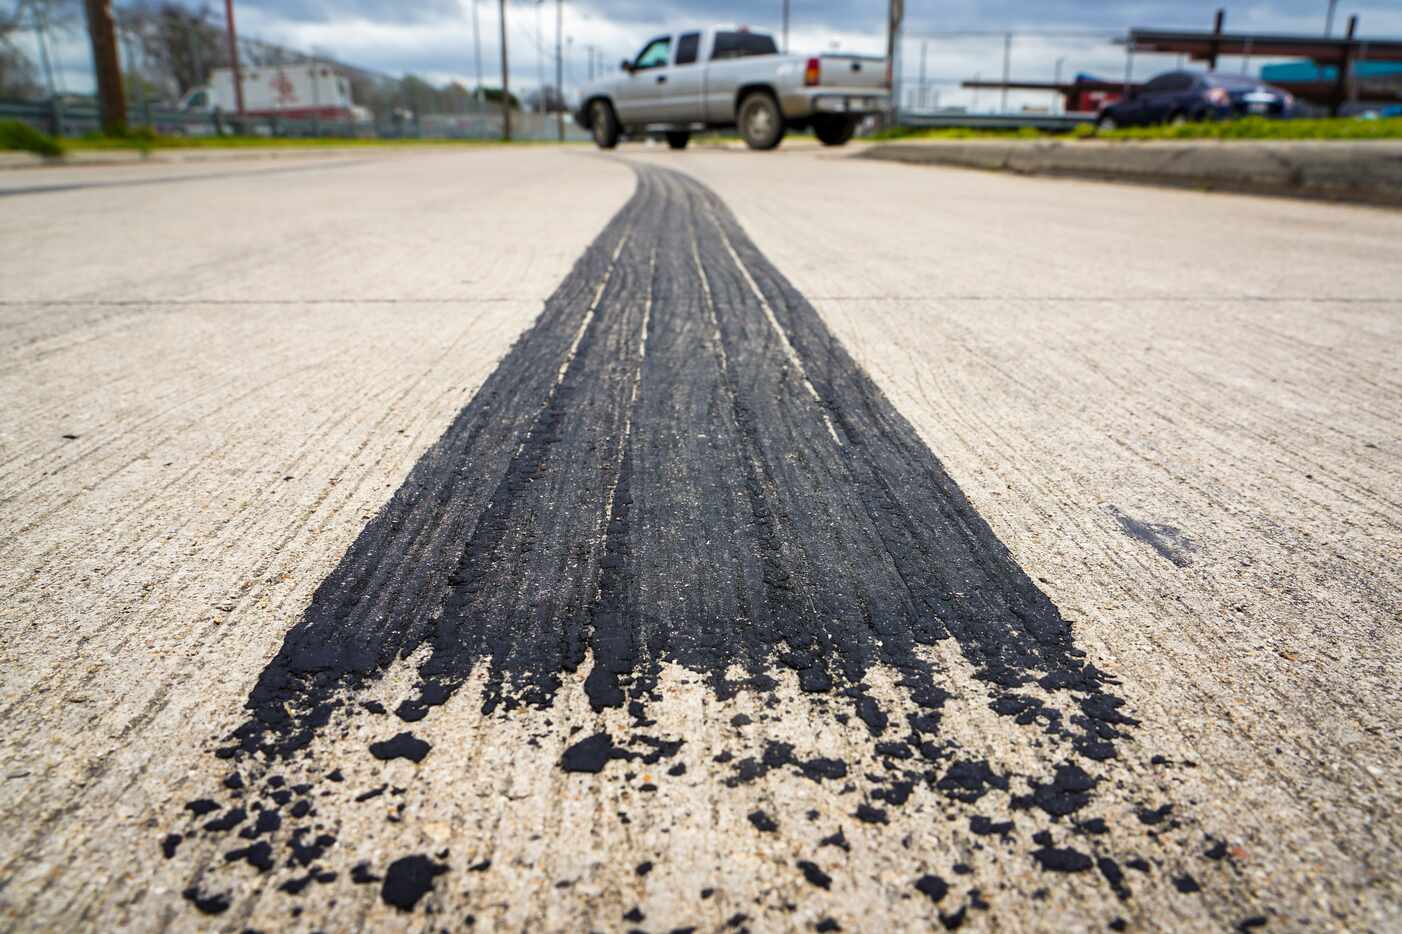 Skid marks are seen in the 1400 S. Henderson Avenue on Monday, March 9, 2020, in Dallas.